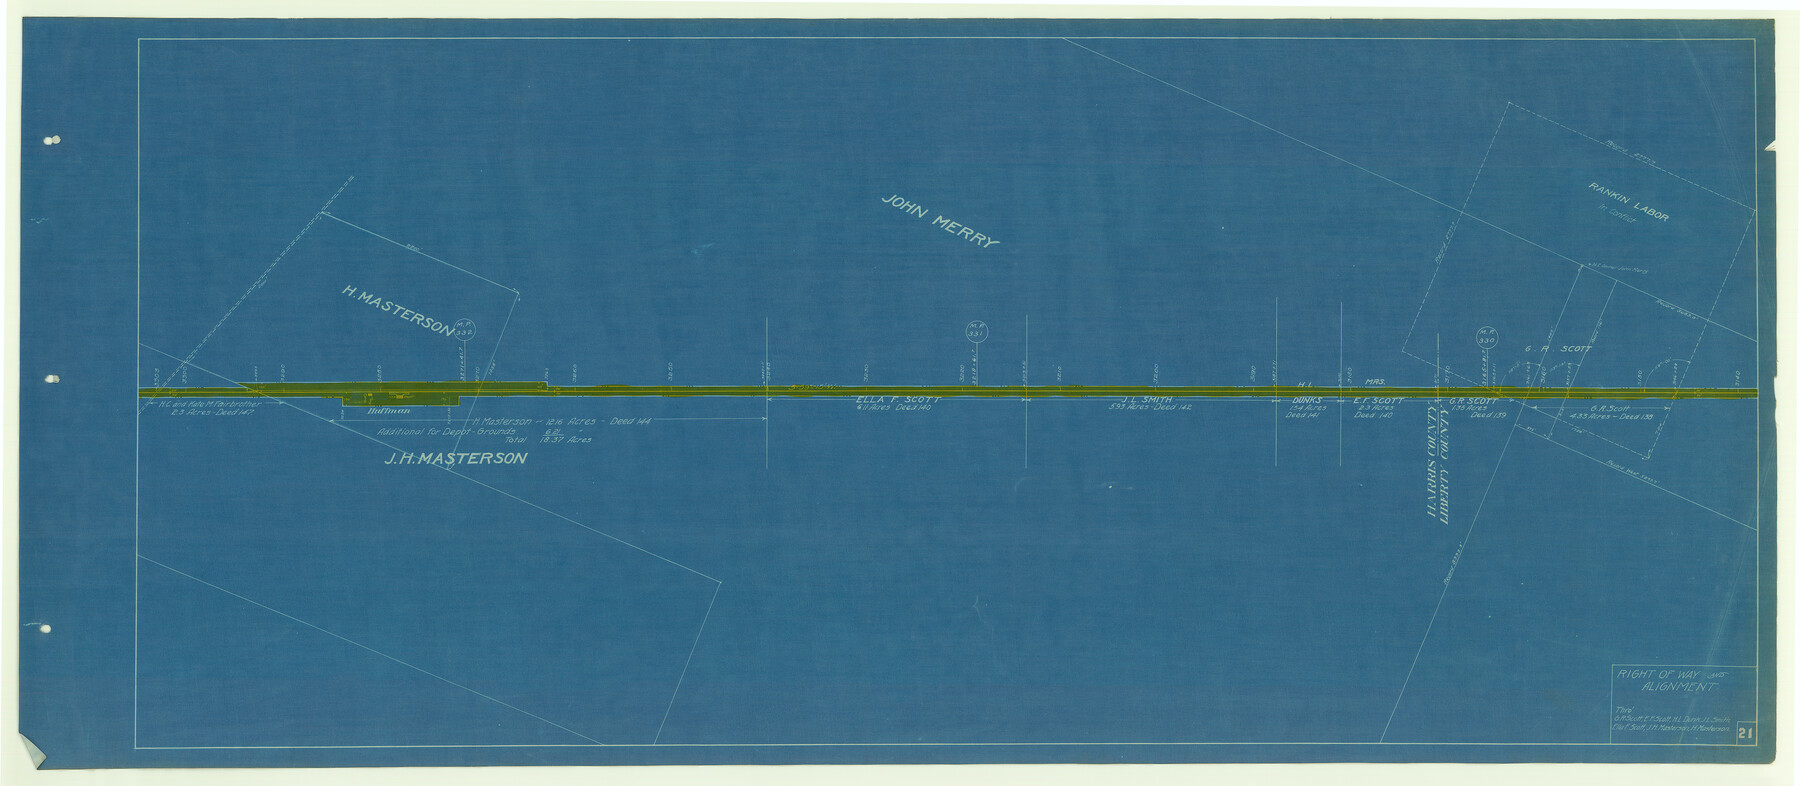 64126, [Beaumont, Sour Lake and Western Ry. Right of Way and Alignment - Frisco], General Map Collection